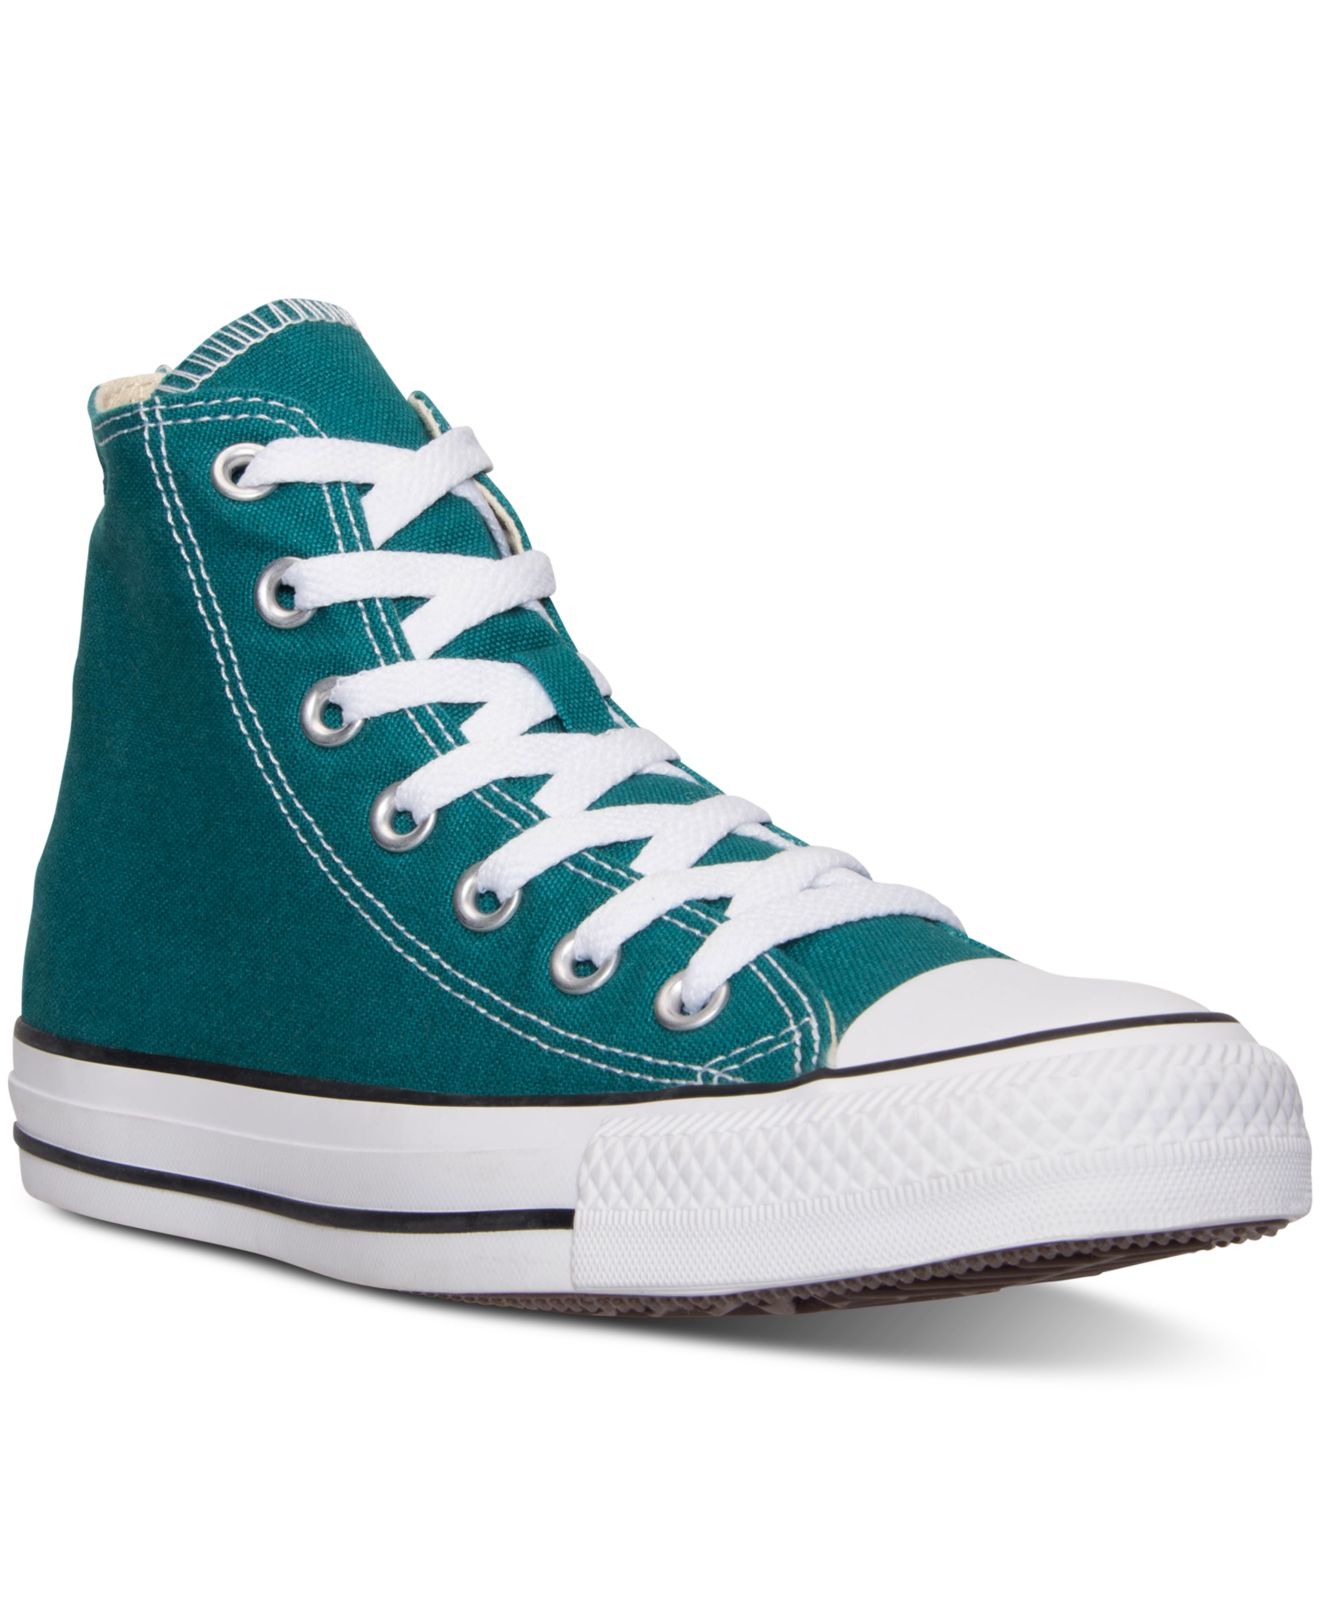 Converse Women's Chuck Taylor Hi Casual Sneakers From ...